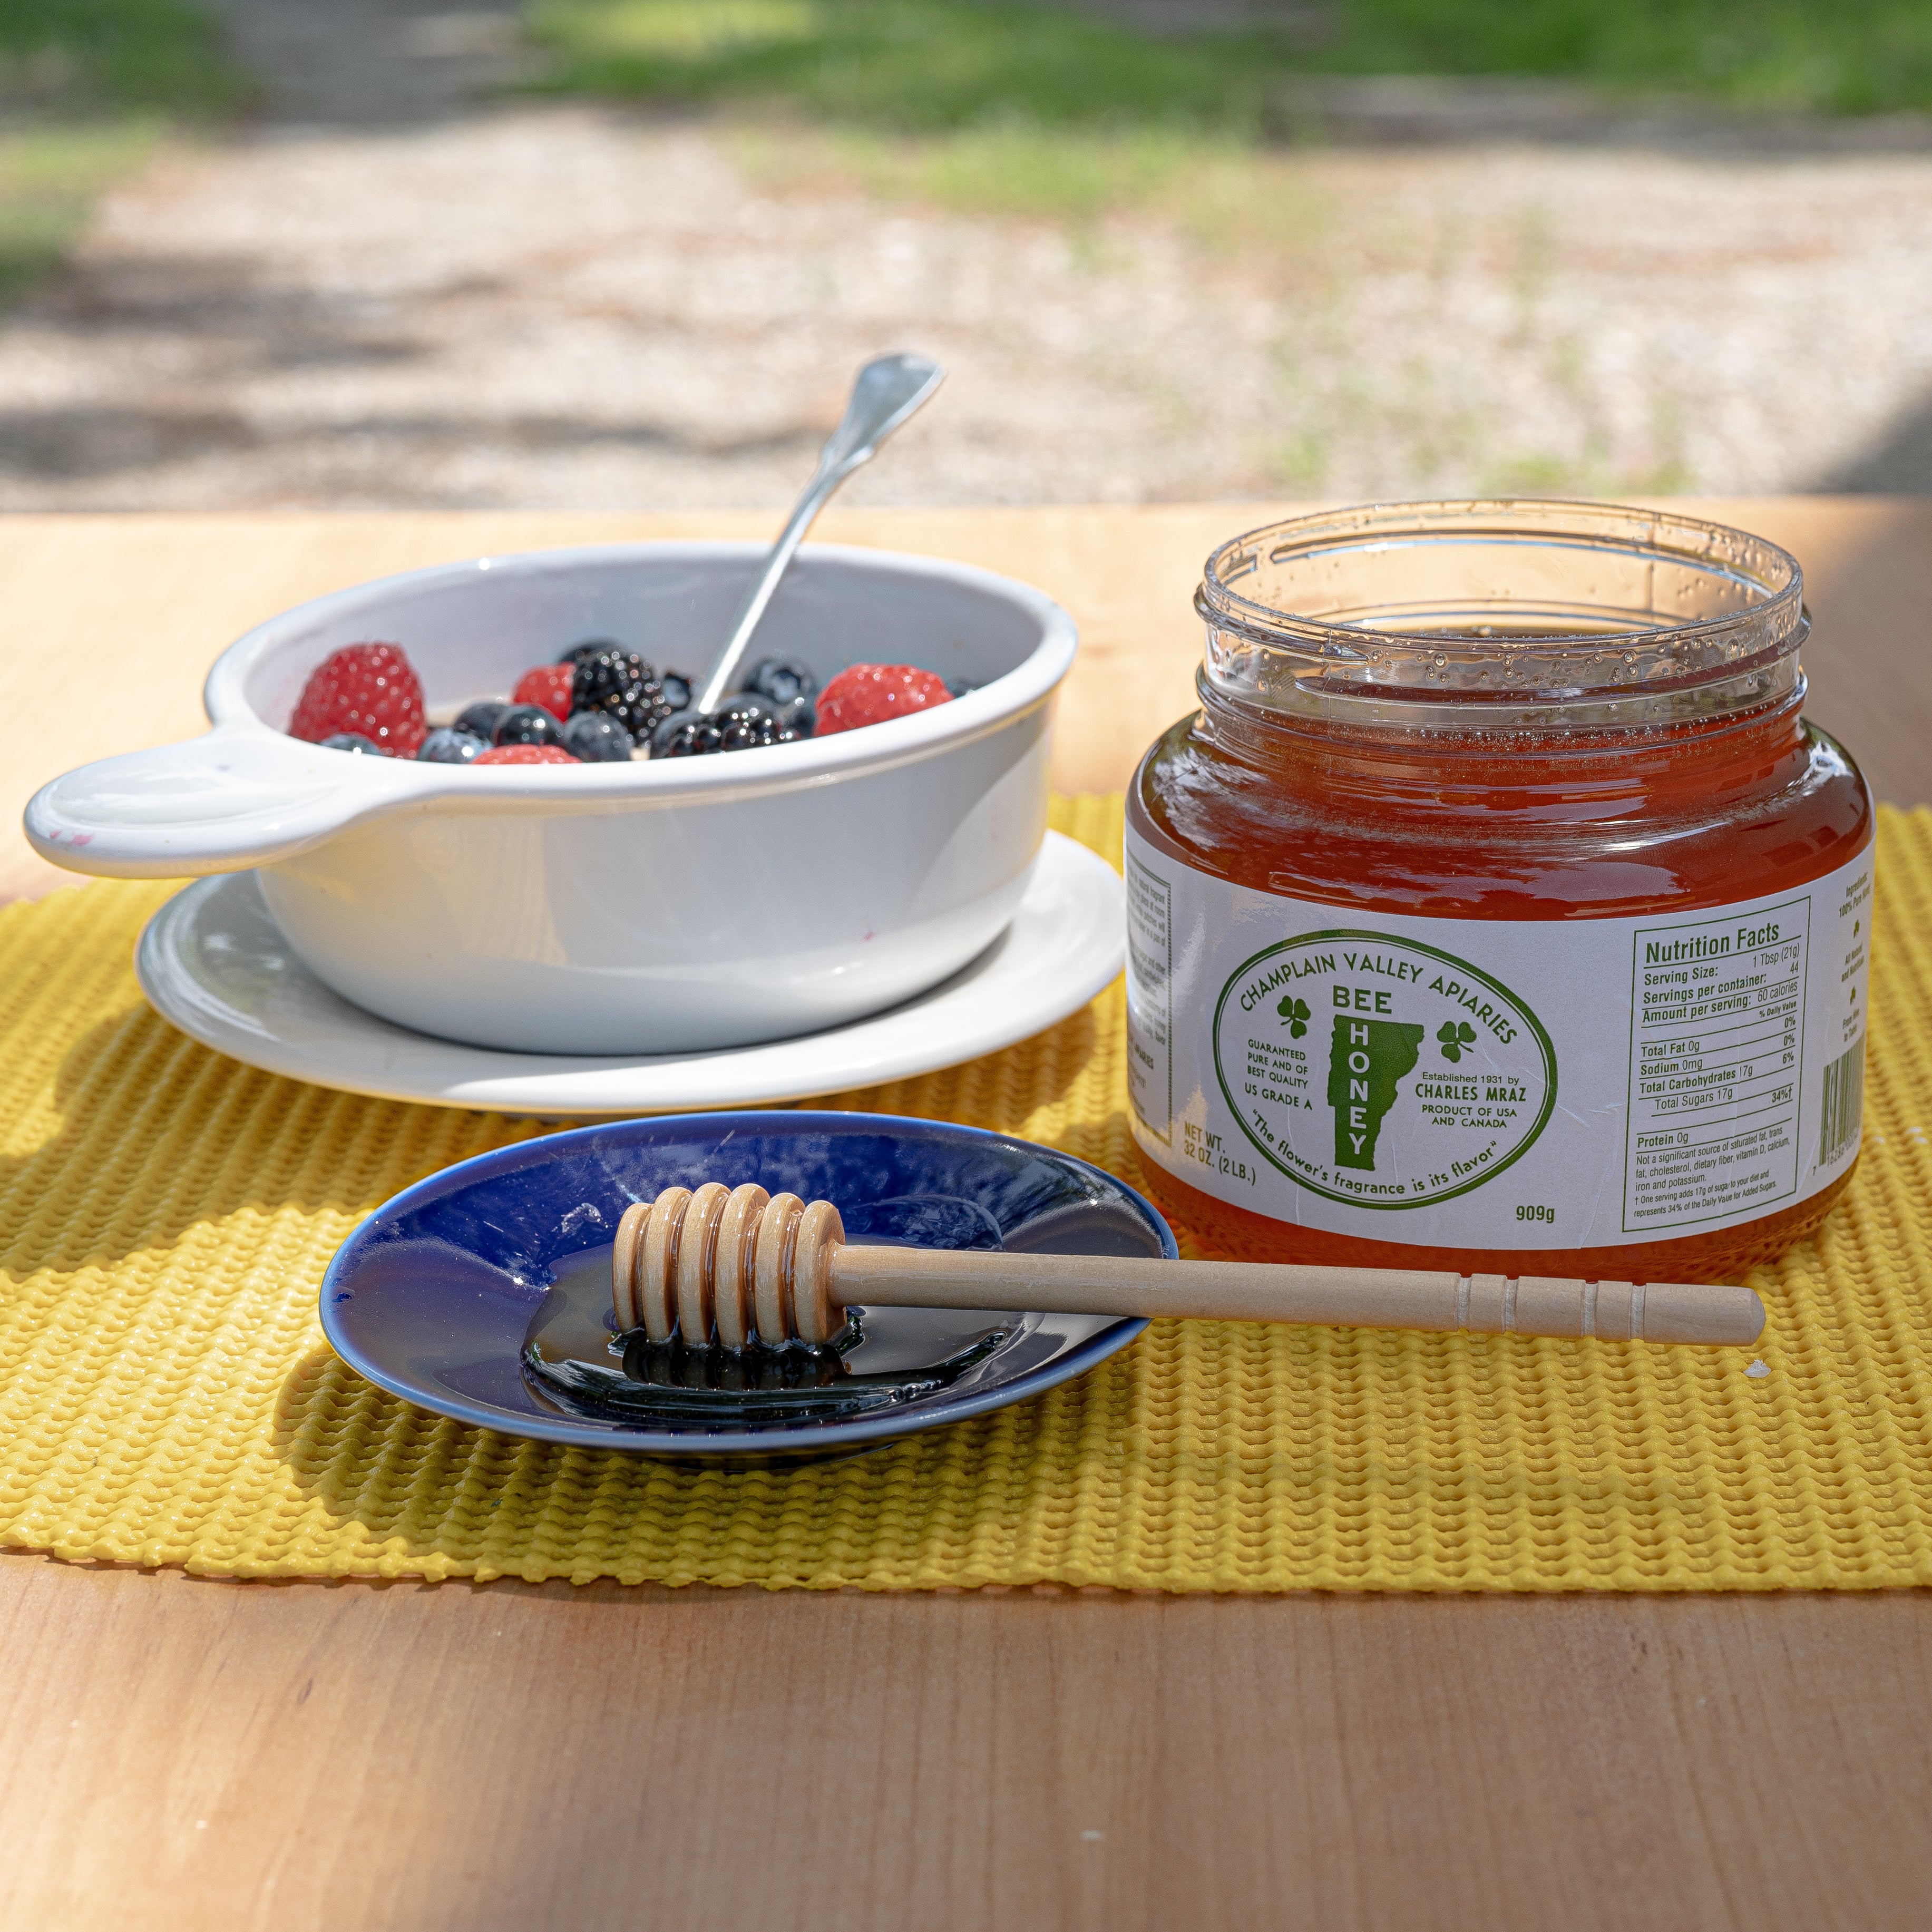 table set outside with a bowl of fruit and a jar of champlain valley apiaries liquid honey and a honey stick on a plate with honey